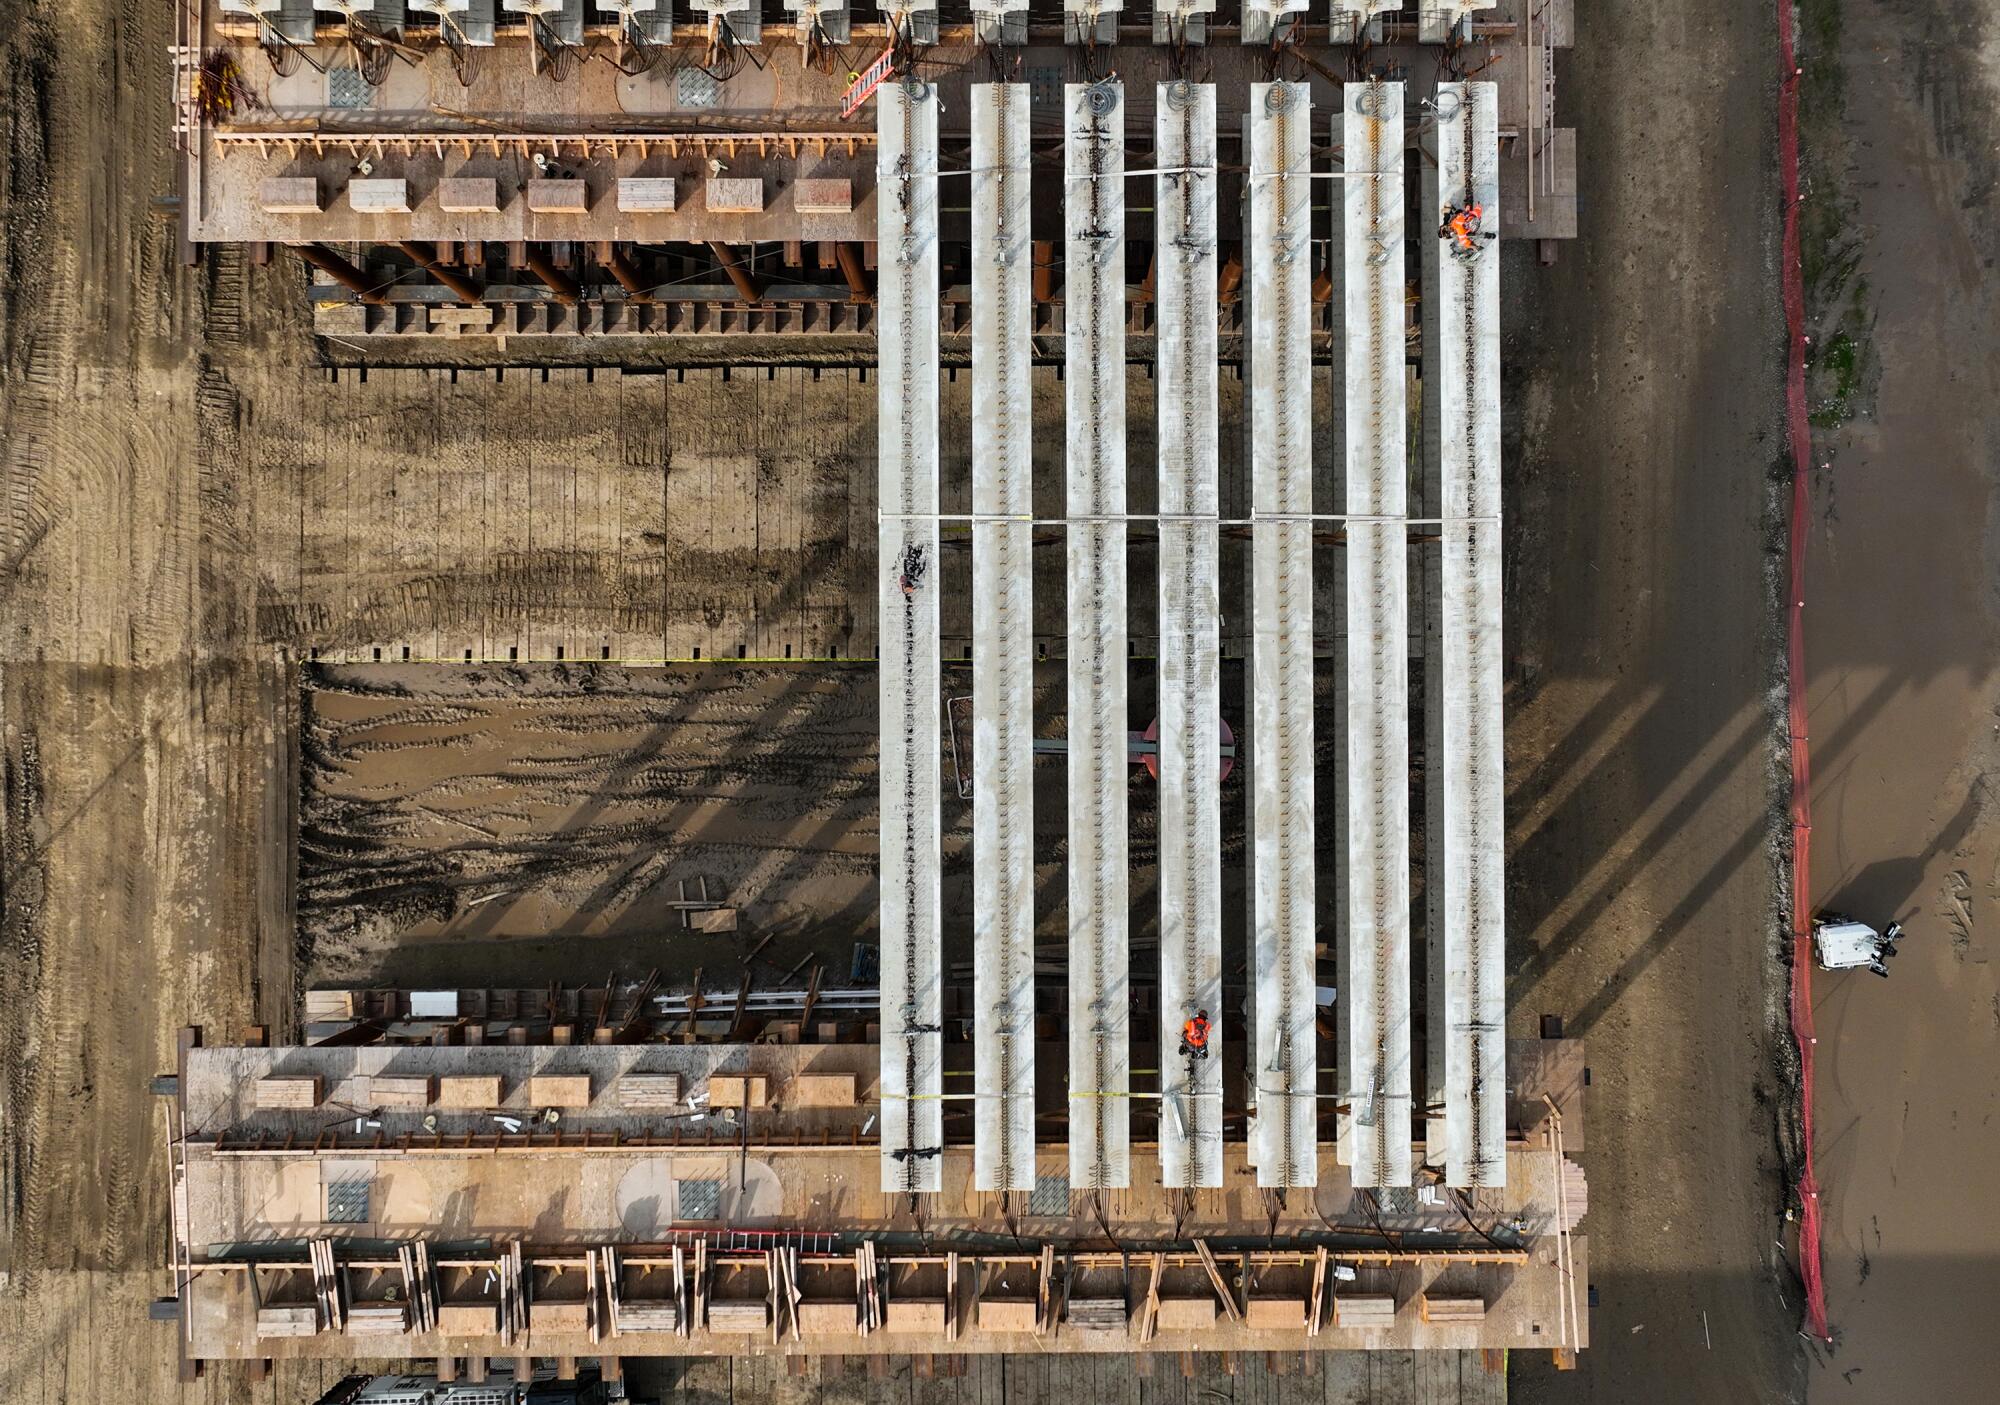 An aerial view of construction of a high-speed rail viaduct.